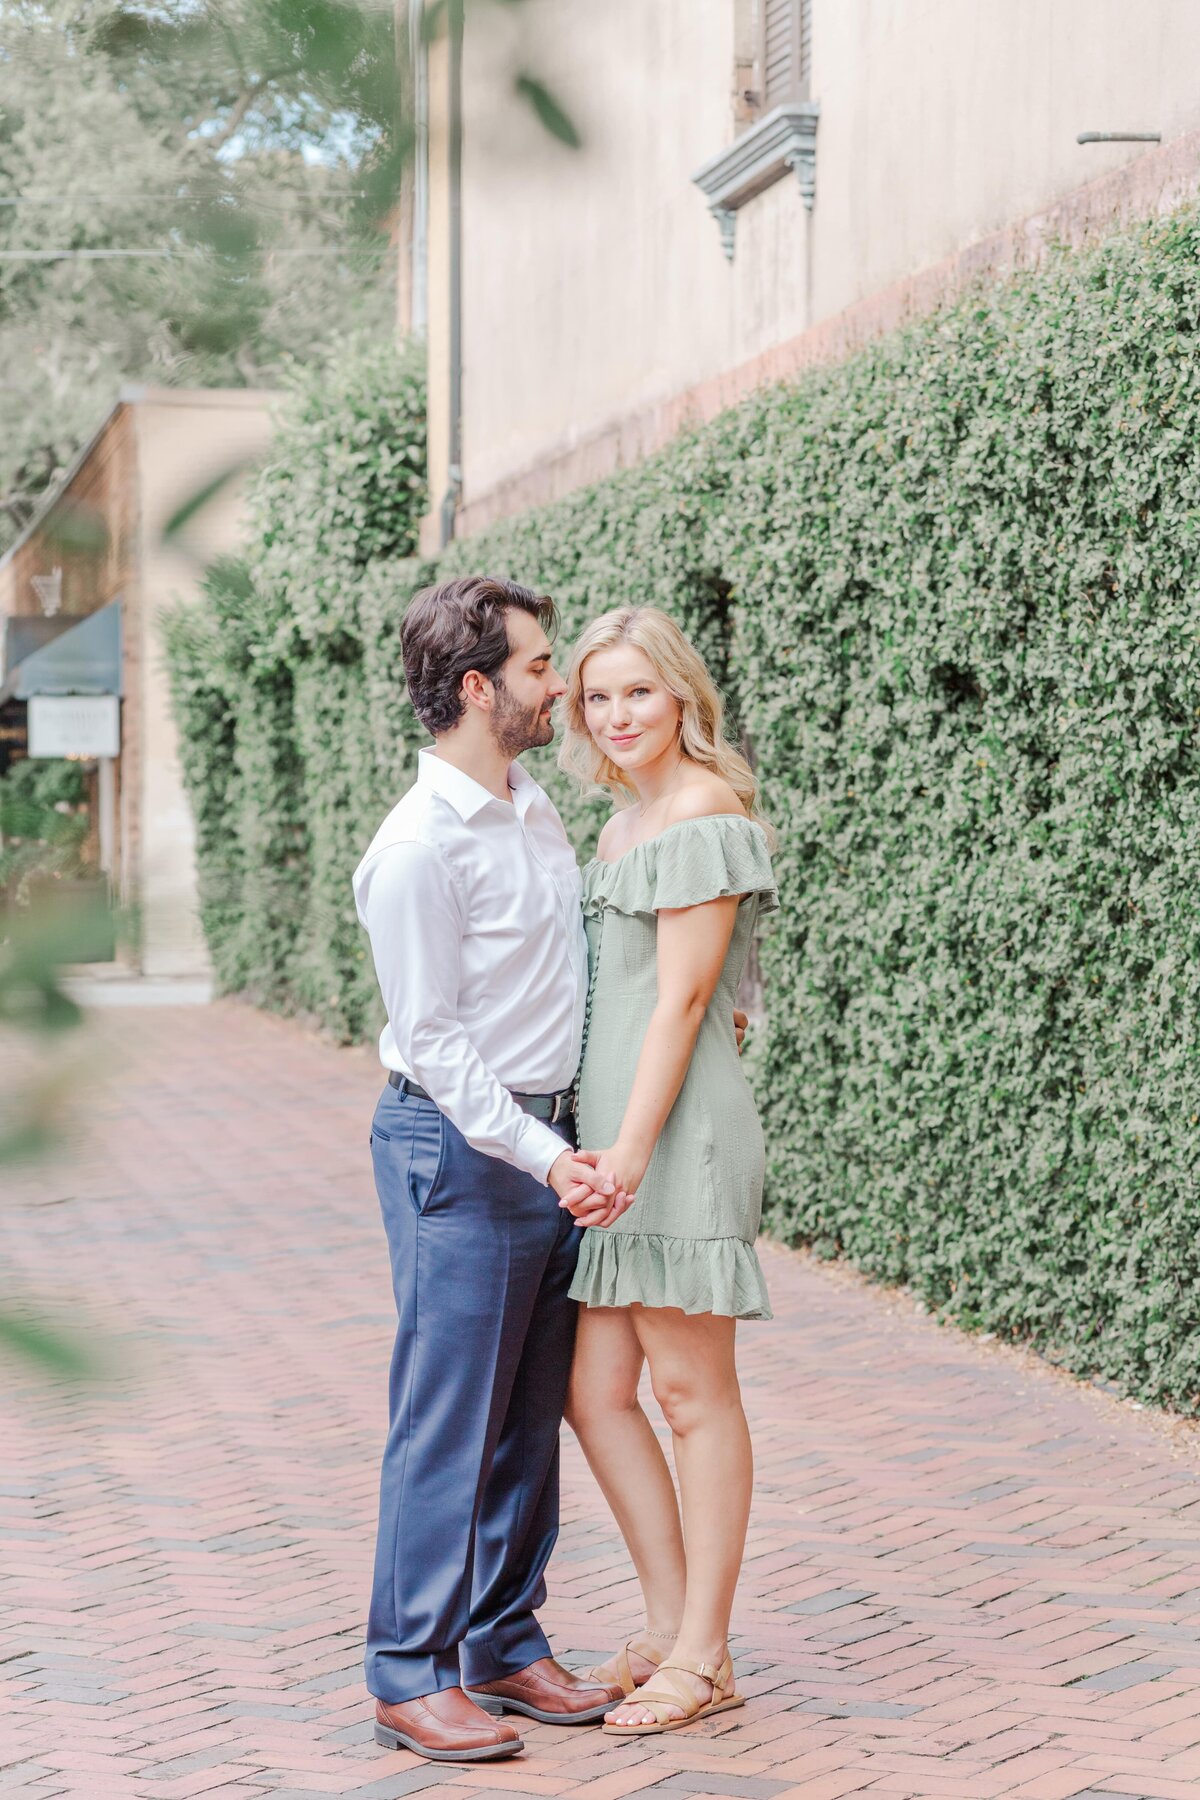 An engaged couple hold hands and embrace on brick sidewalk.